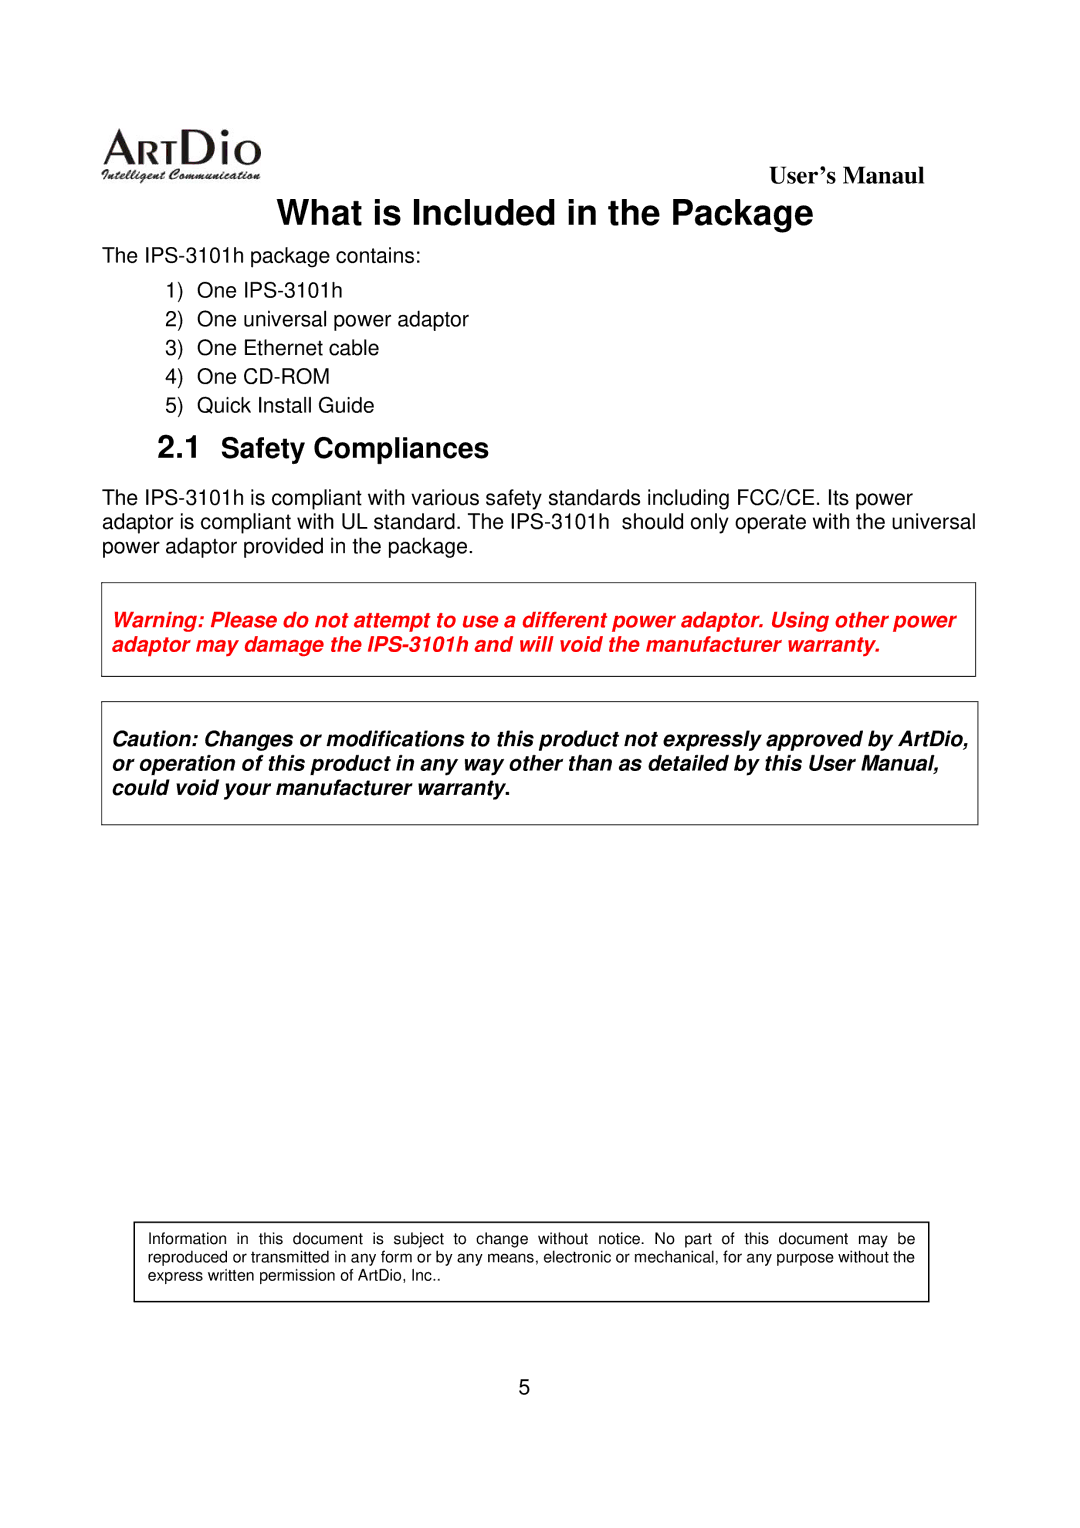 ArtDio IPS-3101h user manual What is Included in the Package, Safety Compliances 